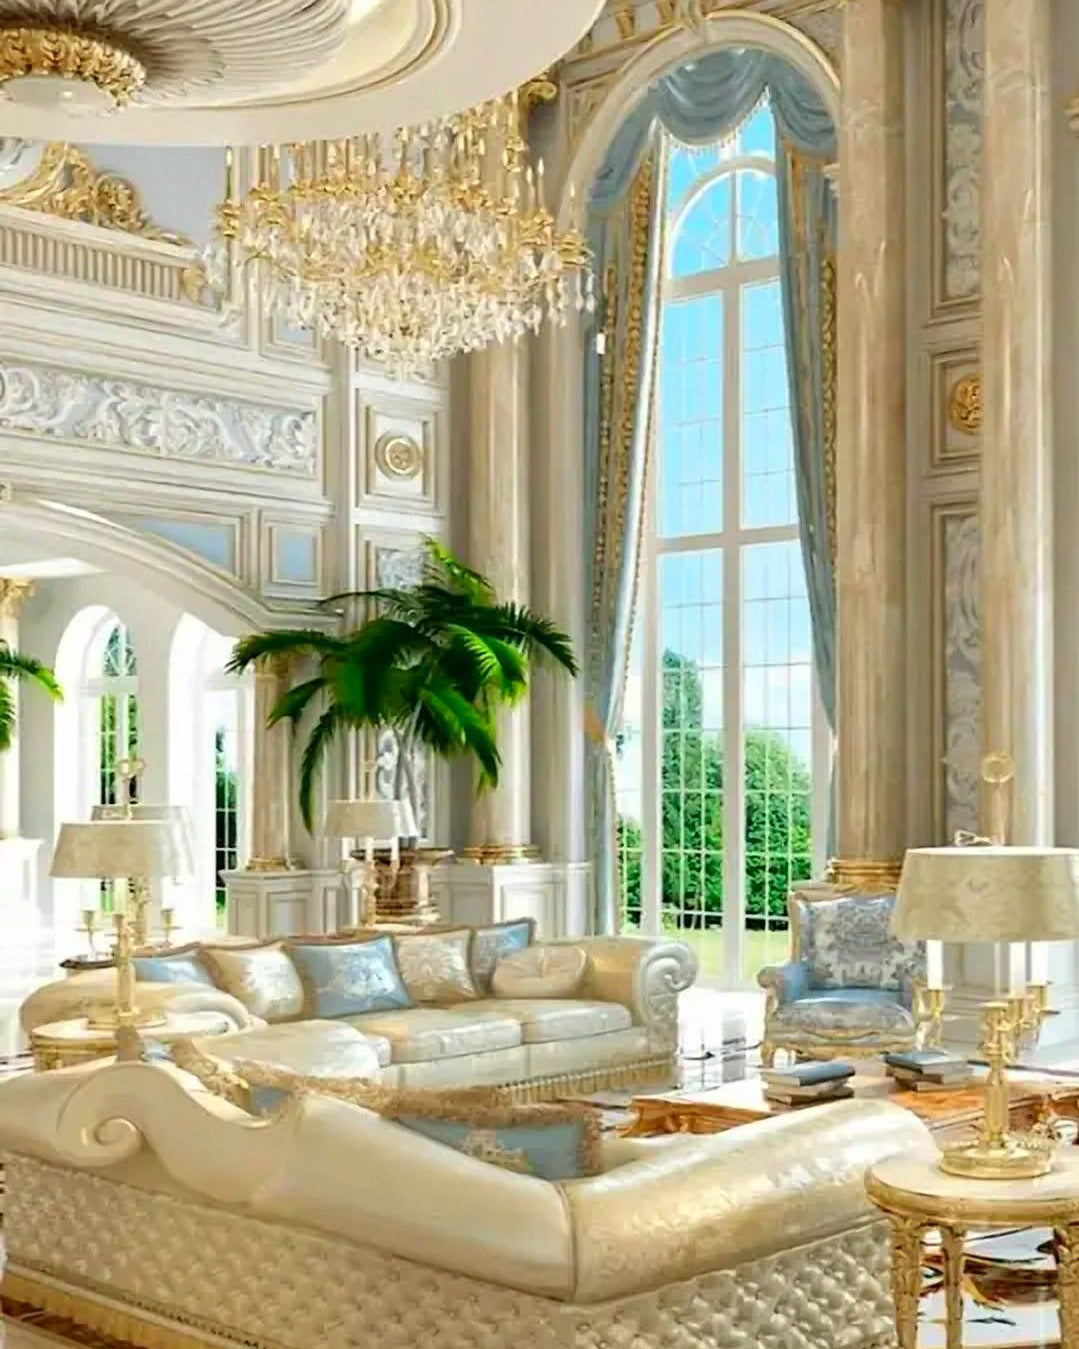 How to Give Living Room a Royal Touch?